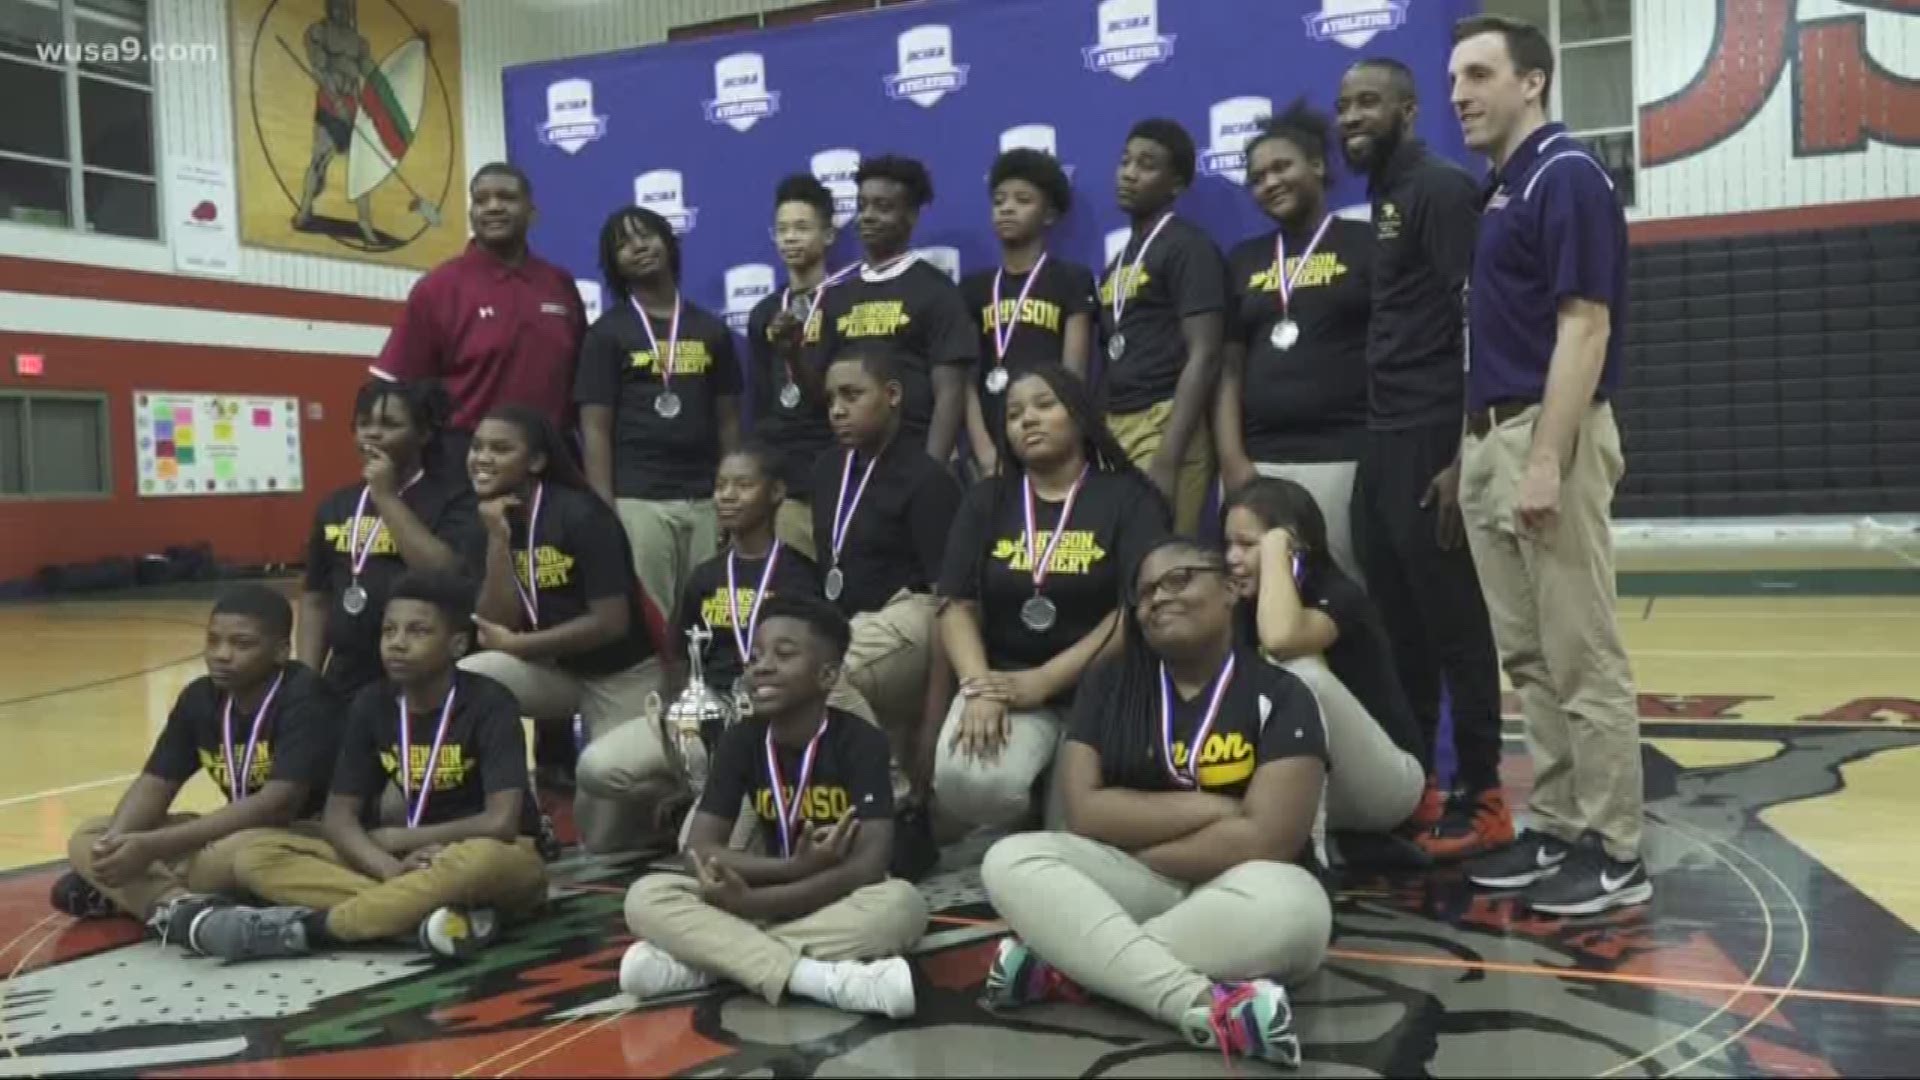 For Johnson Middle School in Southeast DC, making the DCIAA Middle School Archery Championship is a great accomplishment.